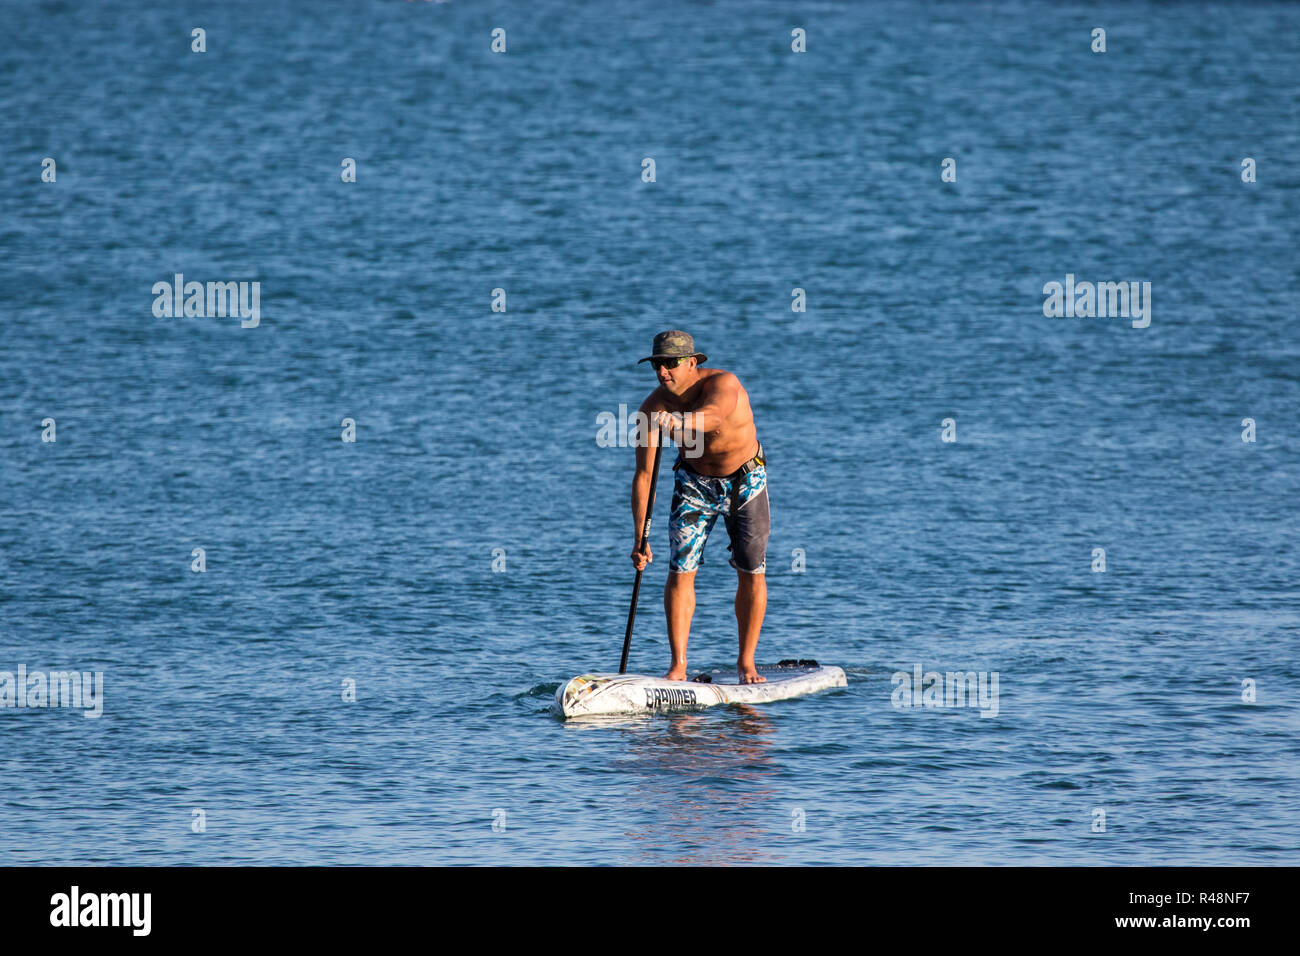 Man on a stand up and paddle board in California USA Stock Photo